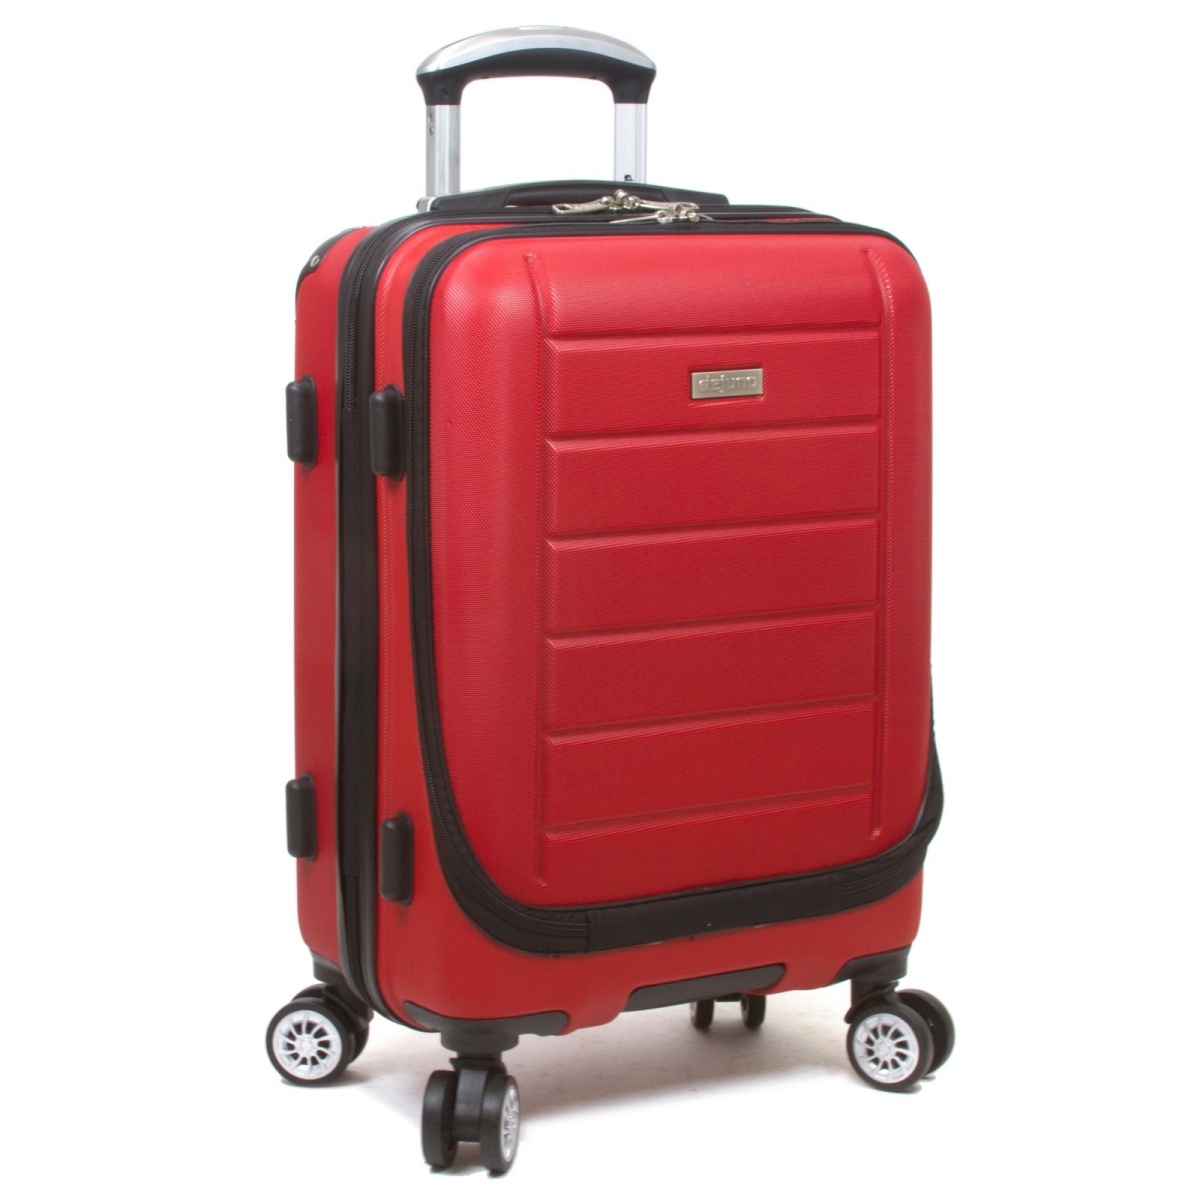 25dj-9902-red 20 In. Compact Hardside Carry-on Luggage With Laptop Pocket, Red